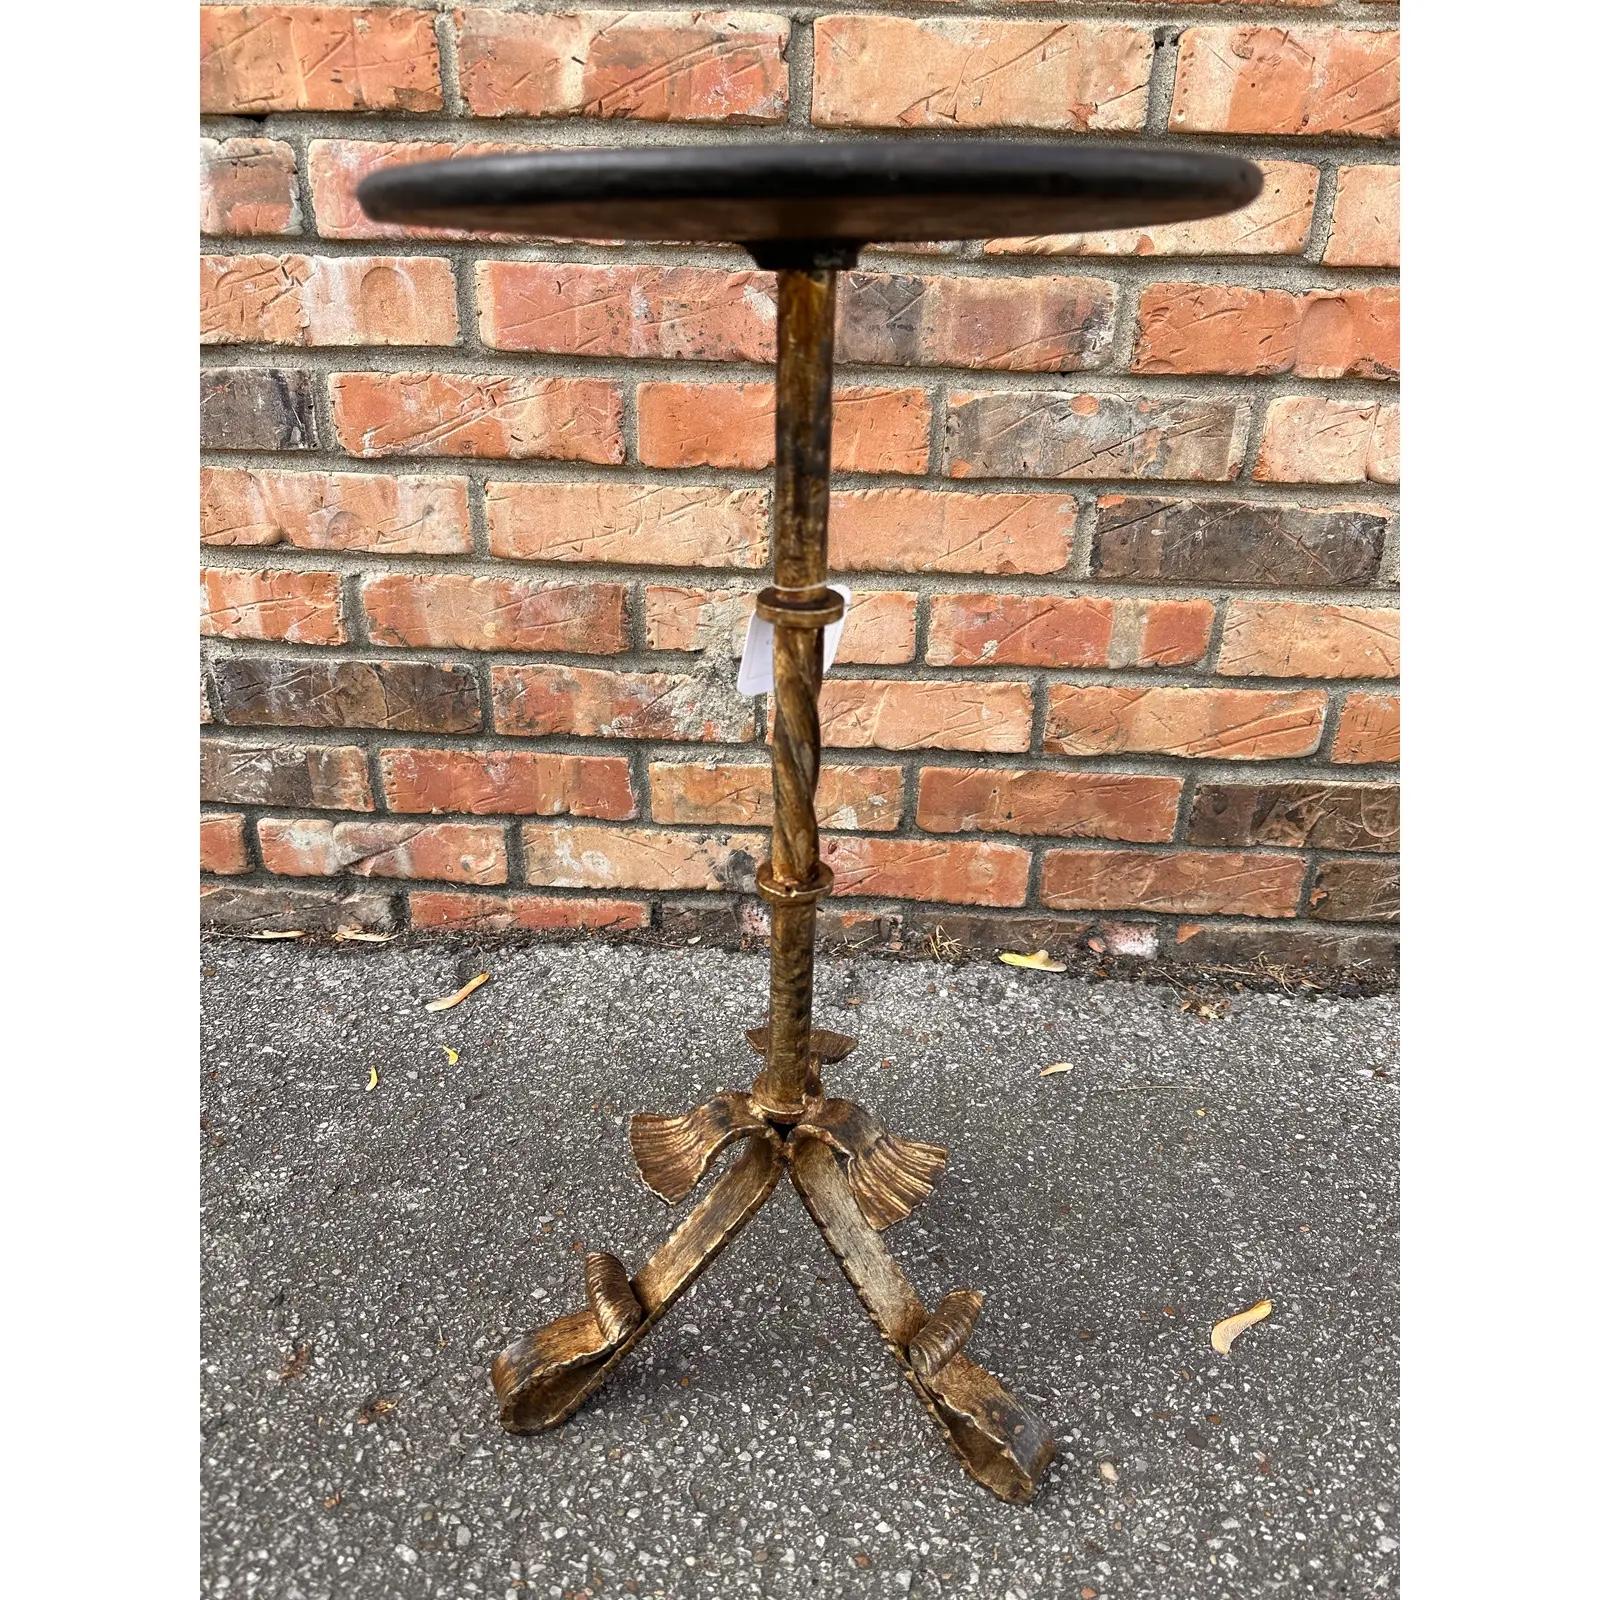 This is wonderful little Spanish made wrought iron drink table with an antiqued gold finish.
Contemporary yet antique inspired style for any decor aesthetic. We have 9 of these listed all have there own unique design, giving them such wonderful